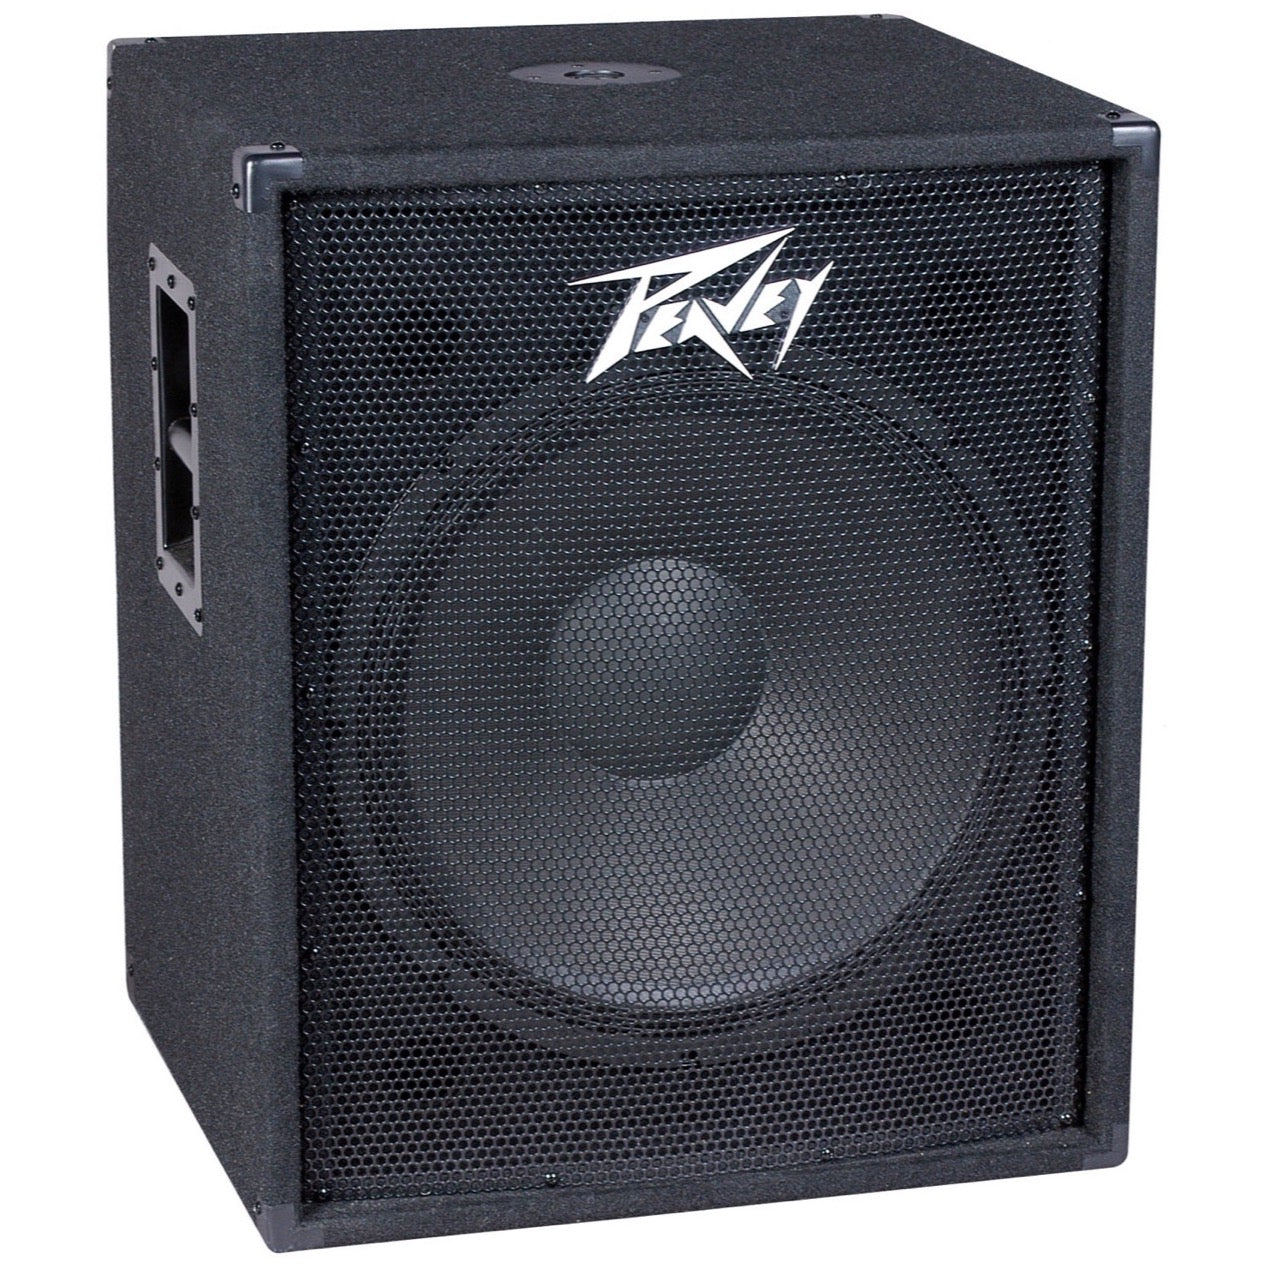 Peavey PV118 Passive, Unpowered Subwoofer (1x18 Inch)